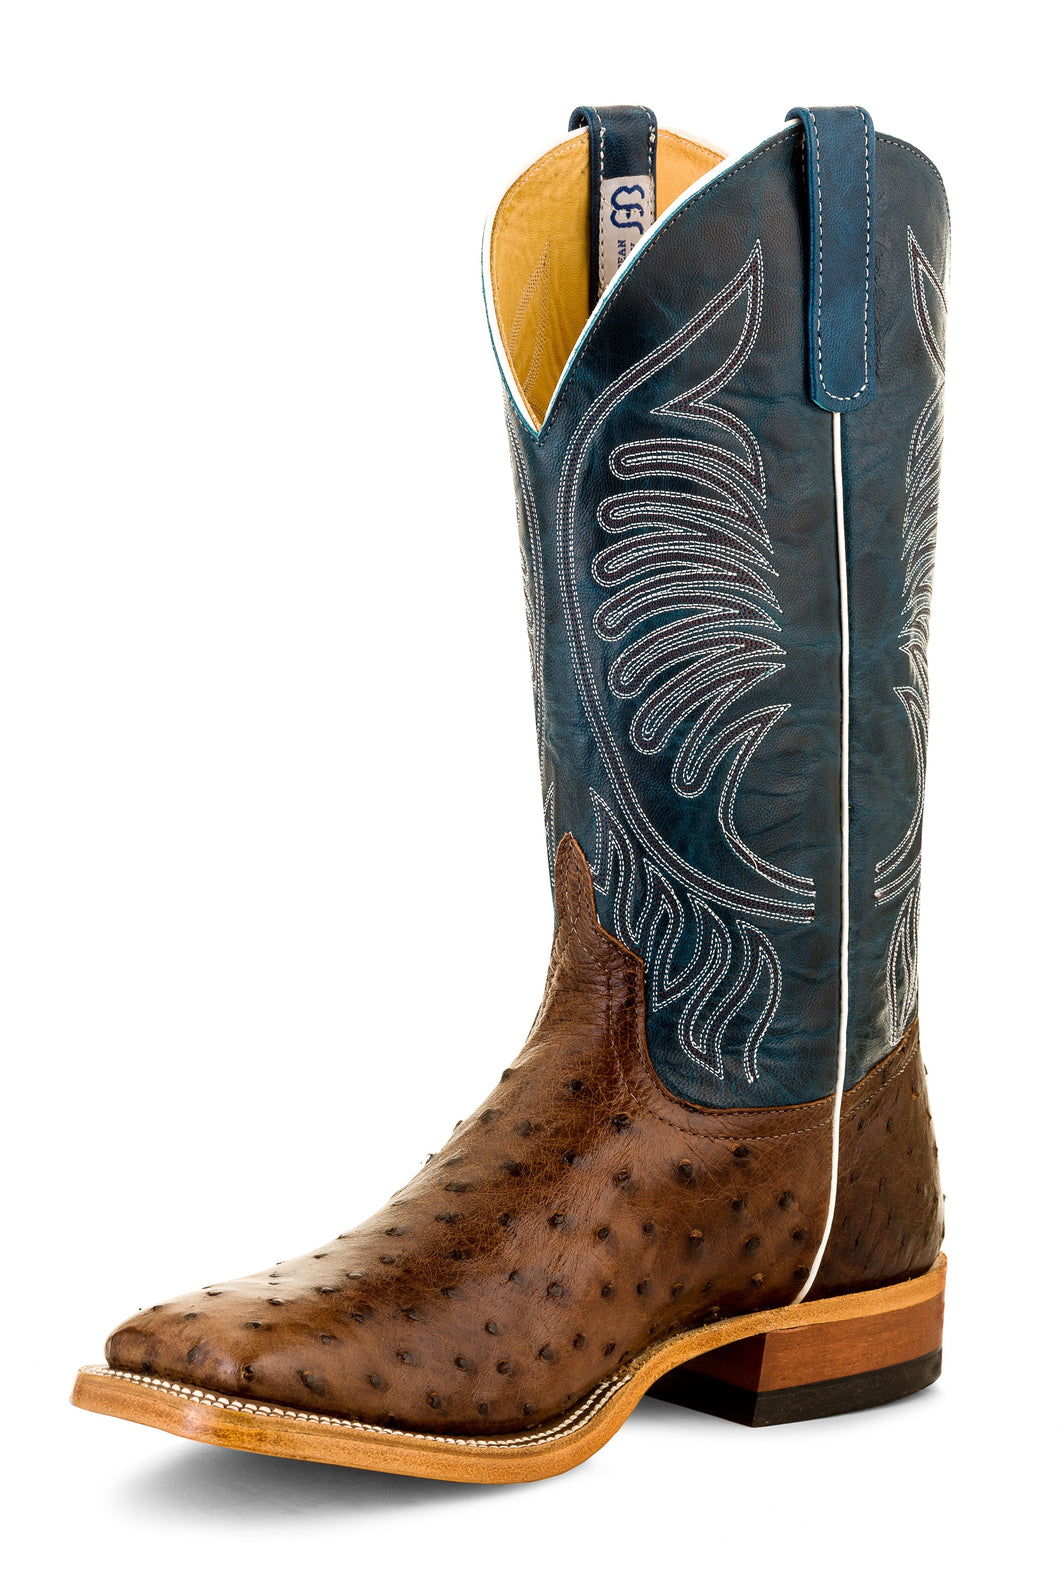 Anderson Bean Kango Tobacco Mad Dog Full Quill Men's Boot